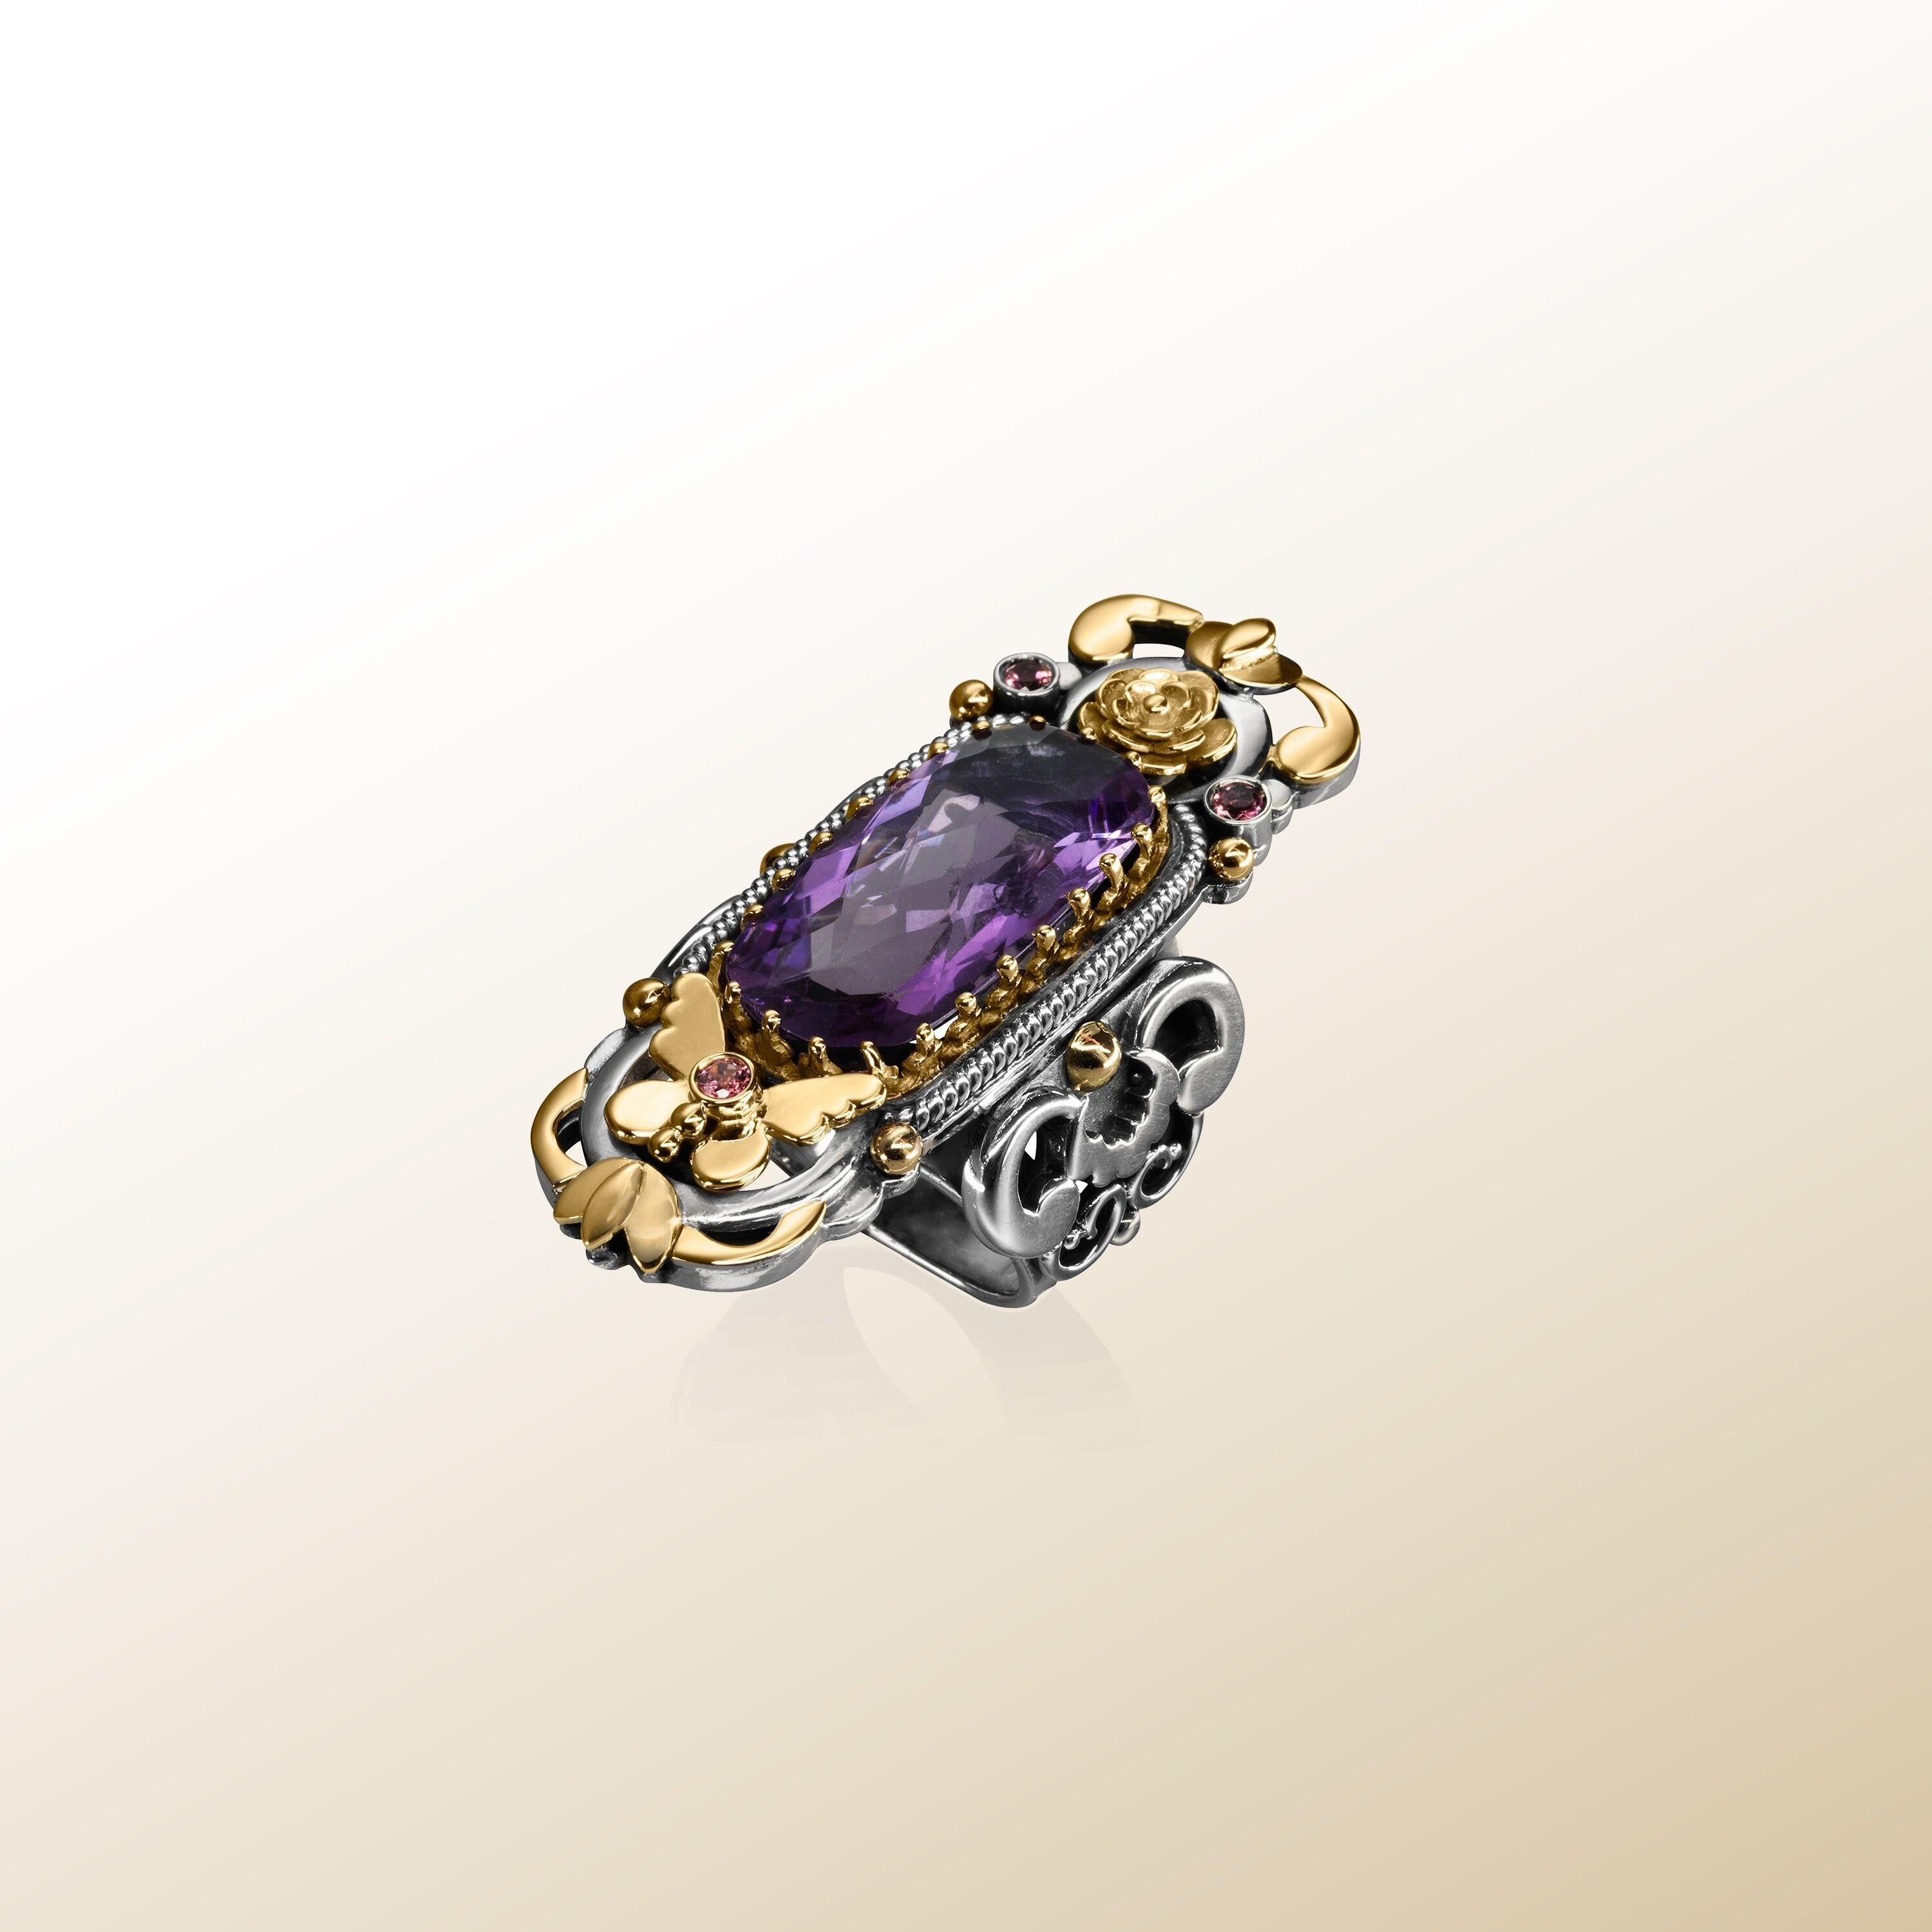 For Sale:  18 Karat Gold, Sterling Silver, Amethyst and Pink Tourmaline Limited Garden Ring 3